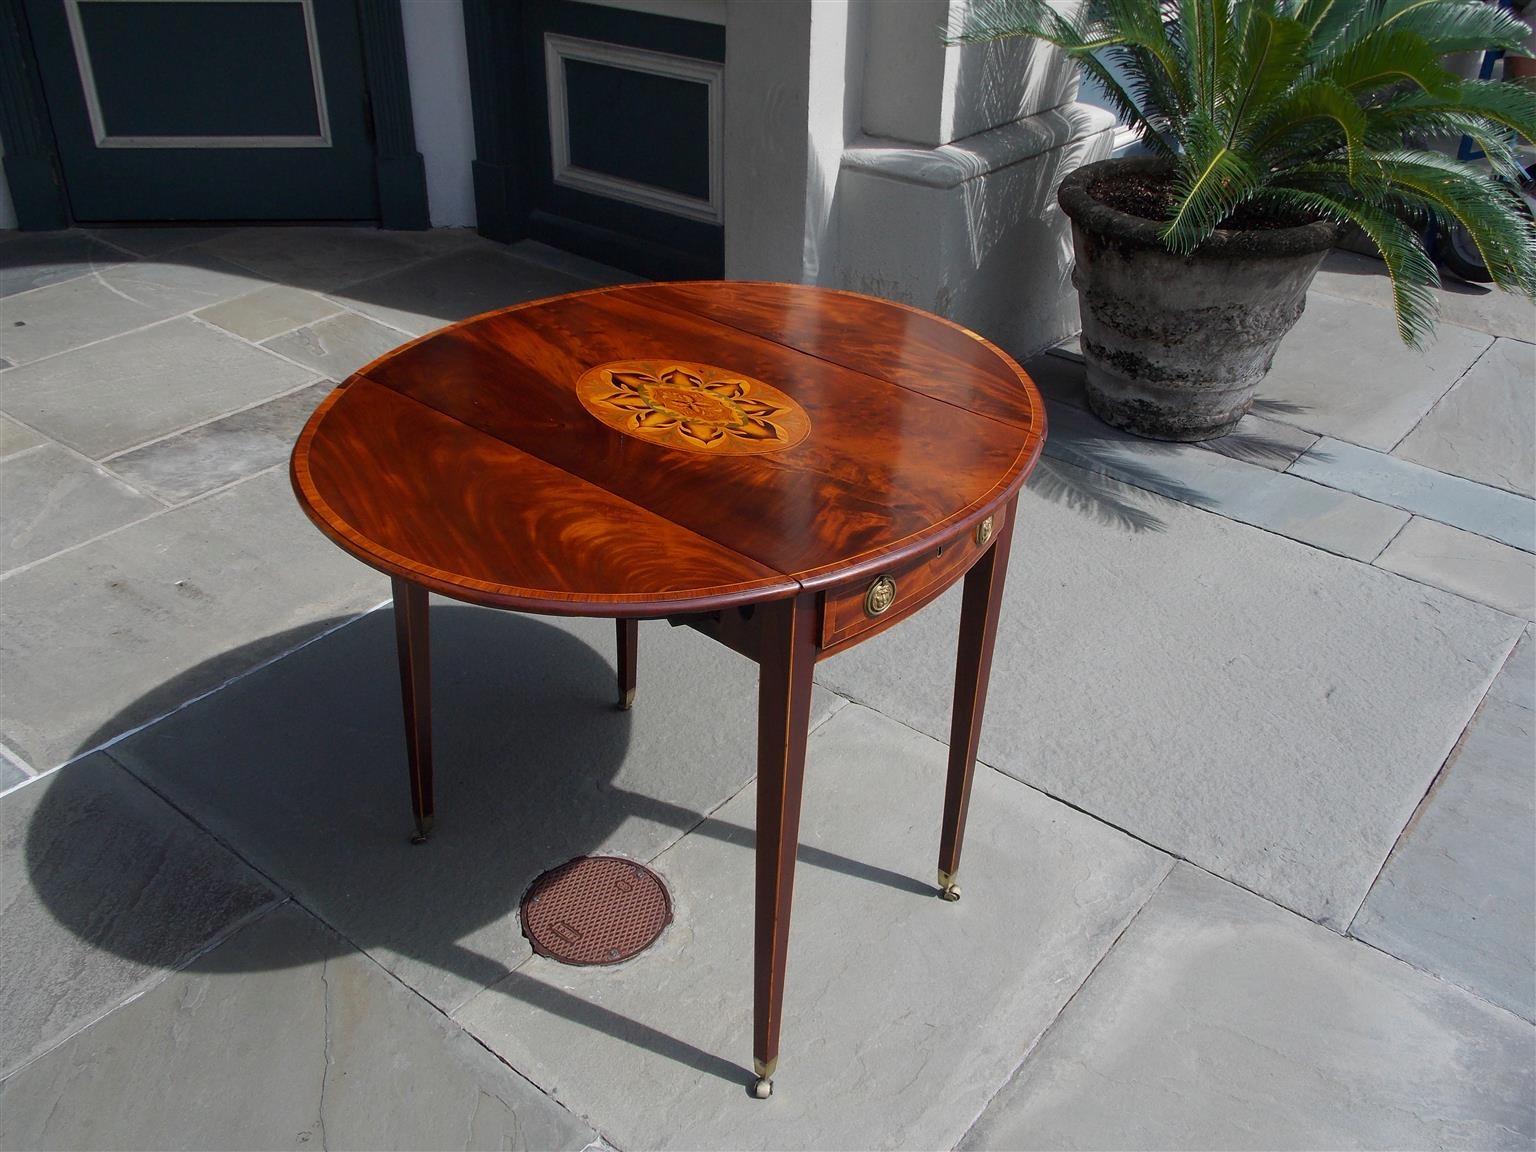 Late 18th Century English Mahogany Oval Satinwood Inlaid One Drawer Pembroke Table, Circa 1770